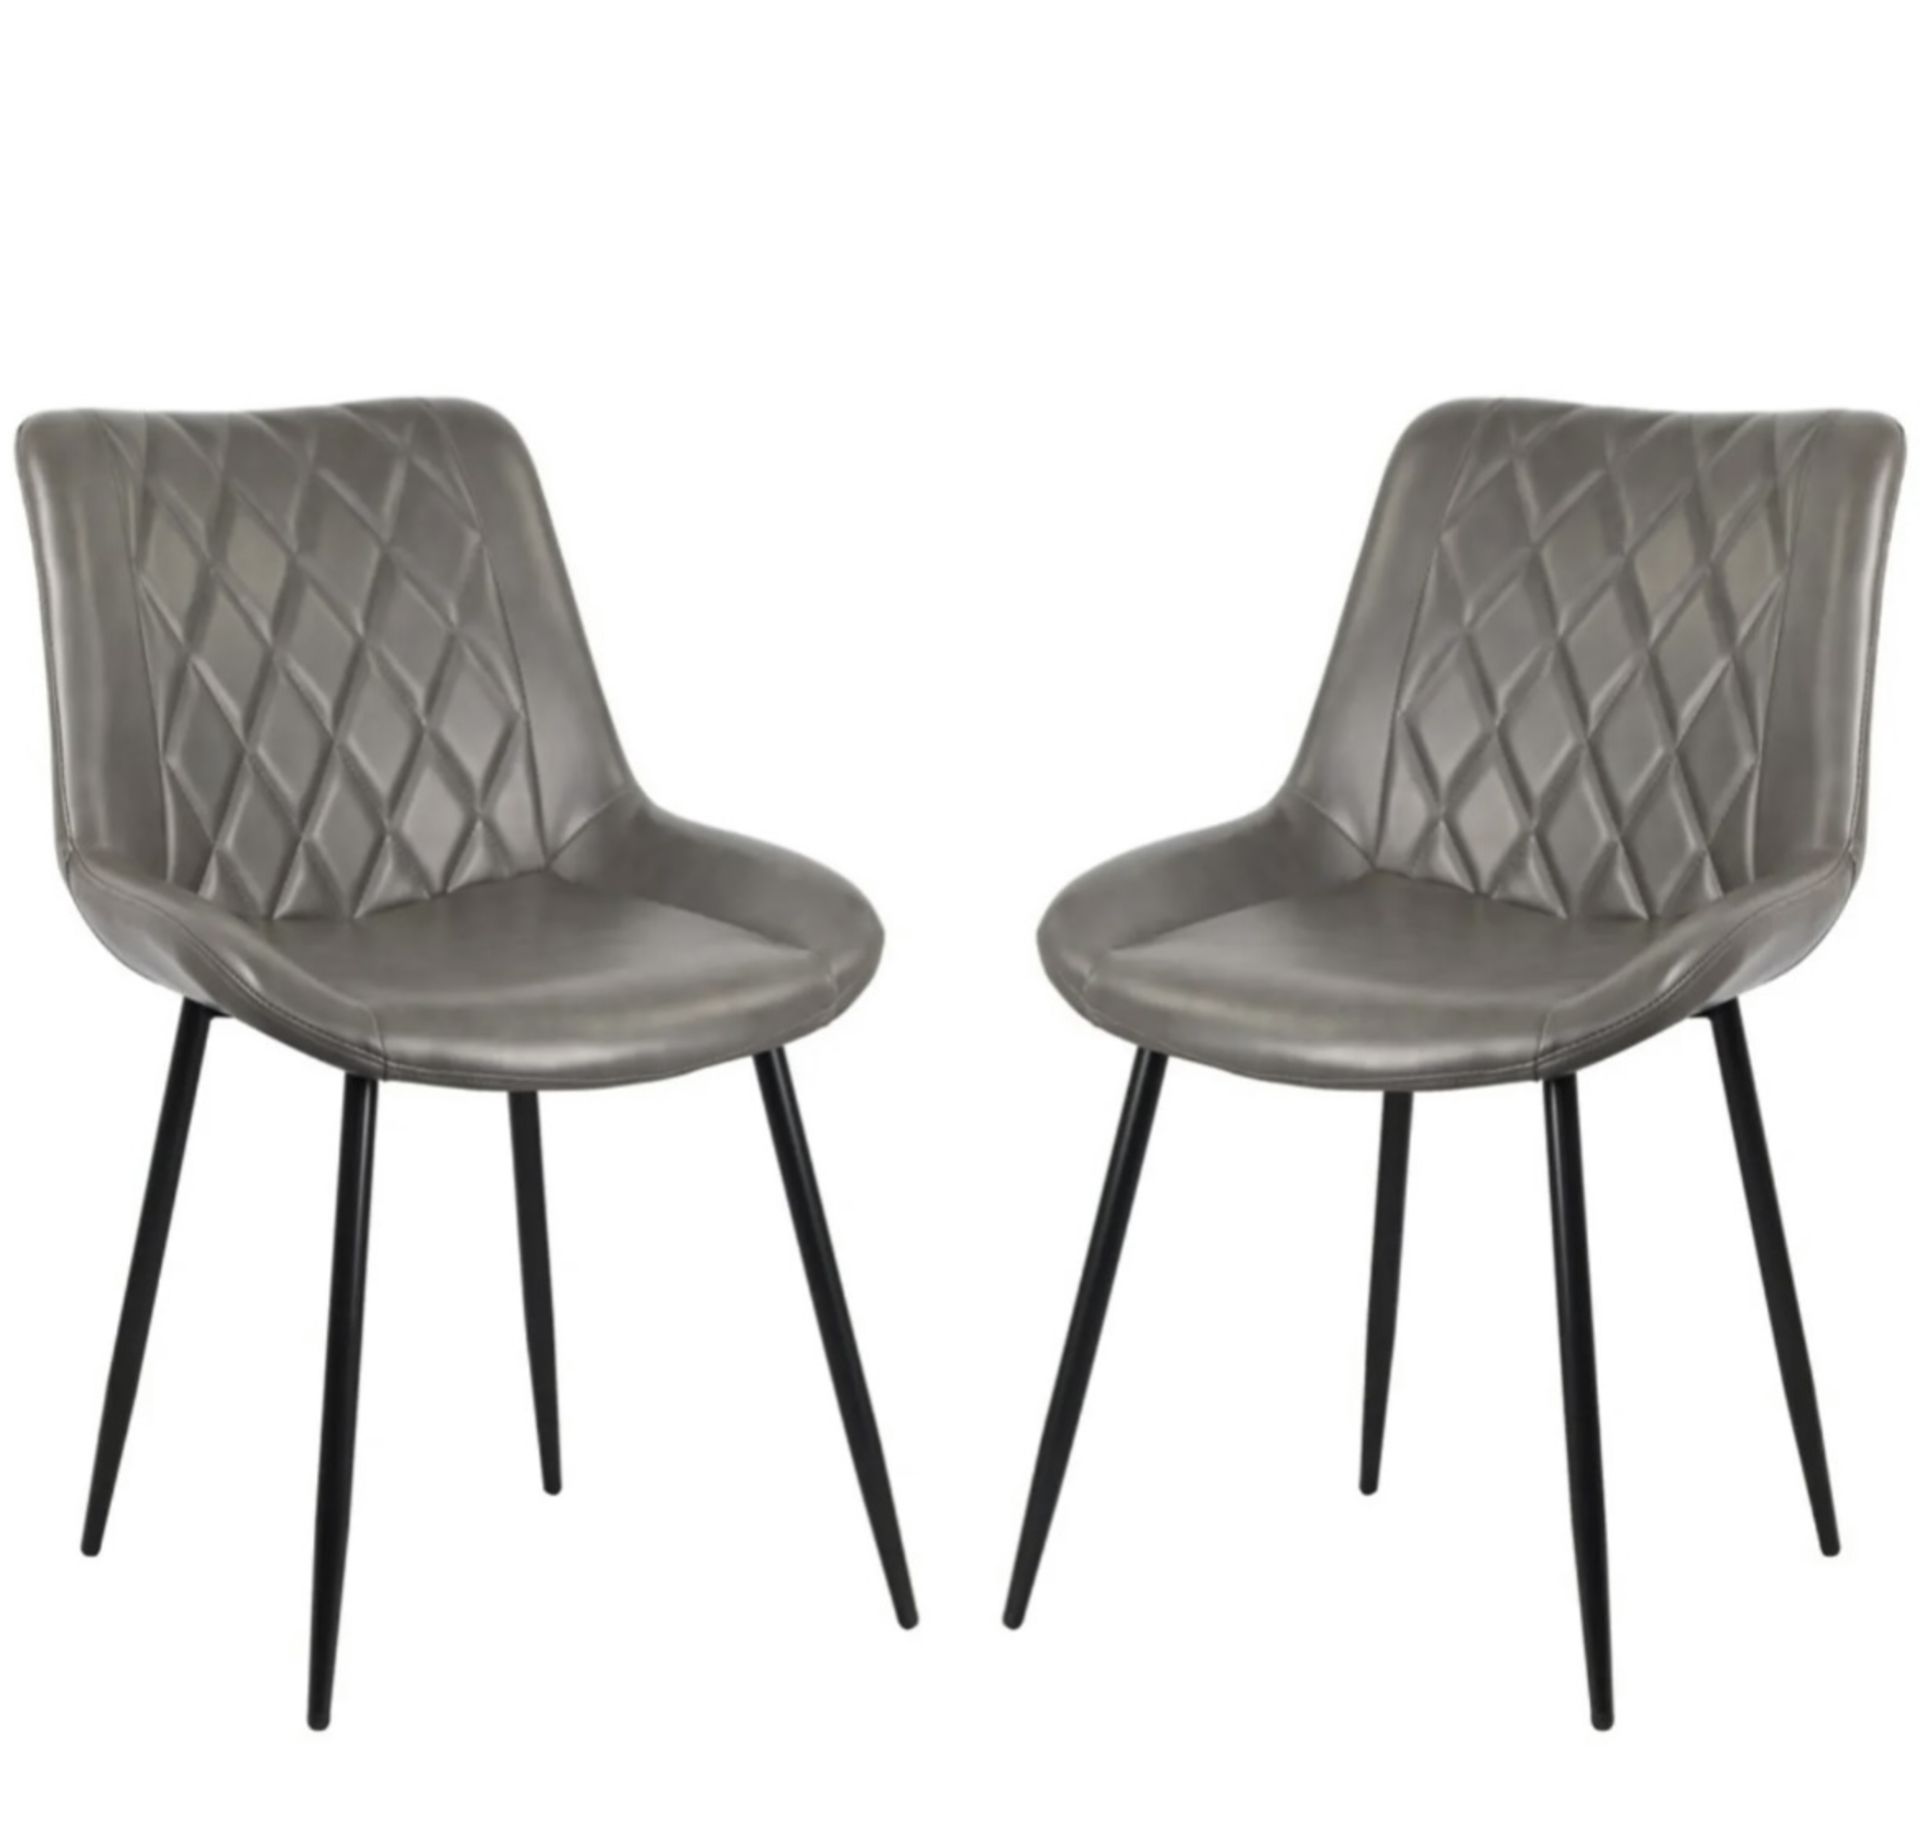 X4 BRAND NEW GREY VINTAGE FAUX LEATHER RESTAURANT/DINING CHAIRS